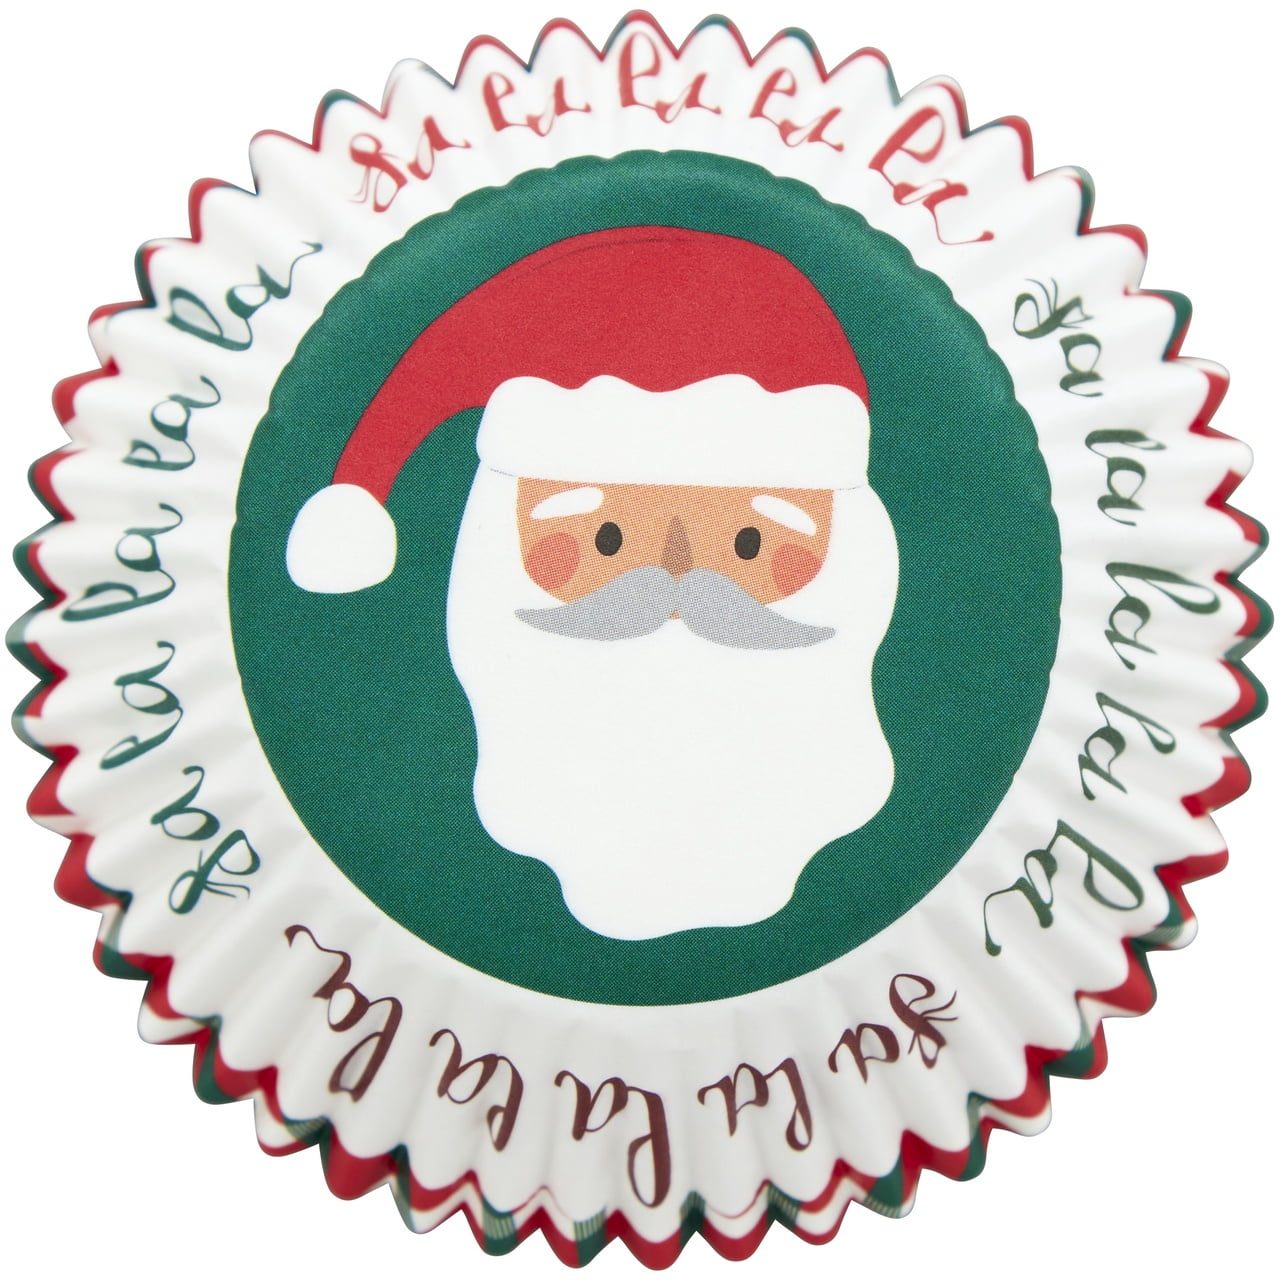 WONDERFUL FATHER CHRISTMAS FACES EDIBLE CUPCAKE TOPPER DECORATIONS X2 